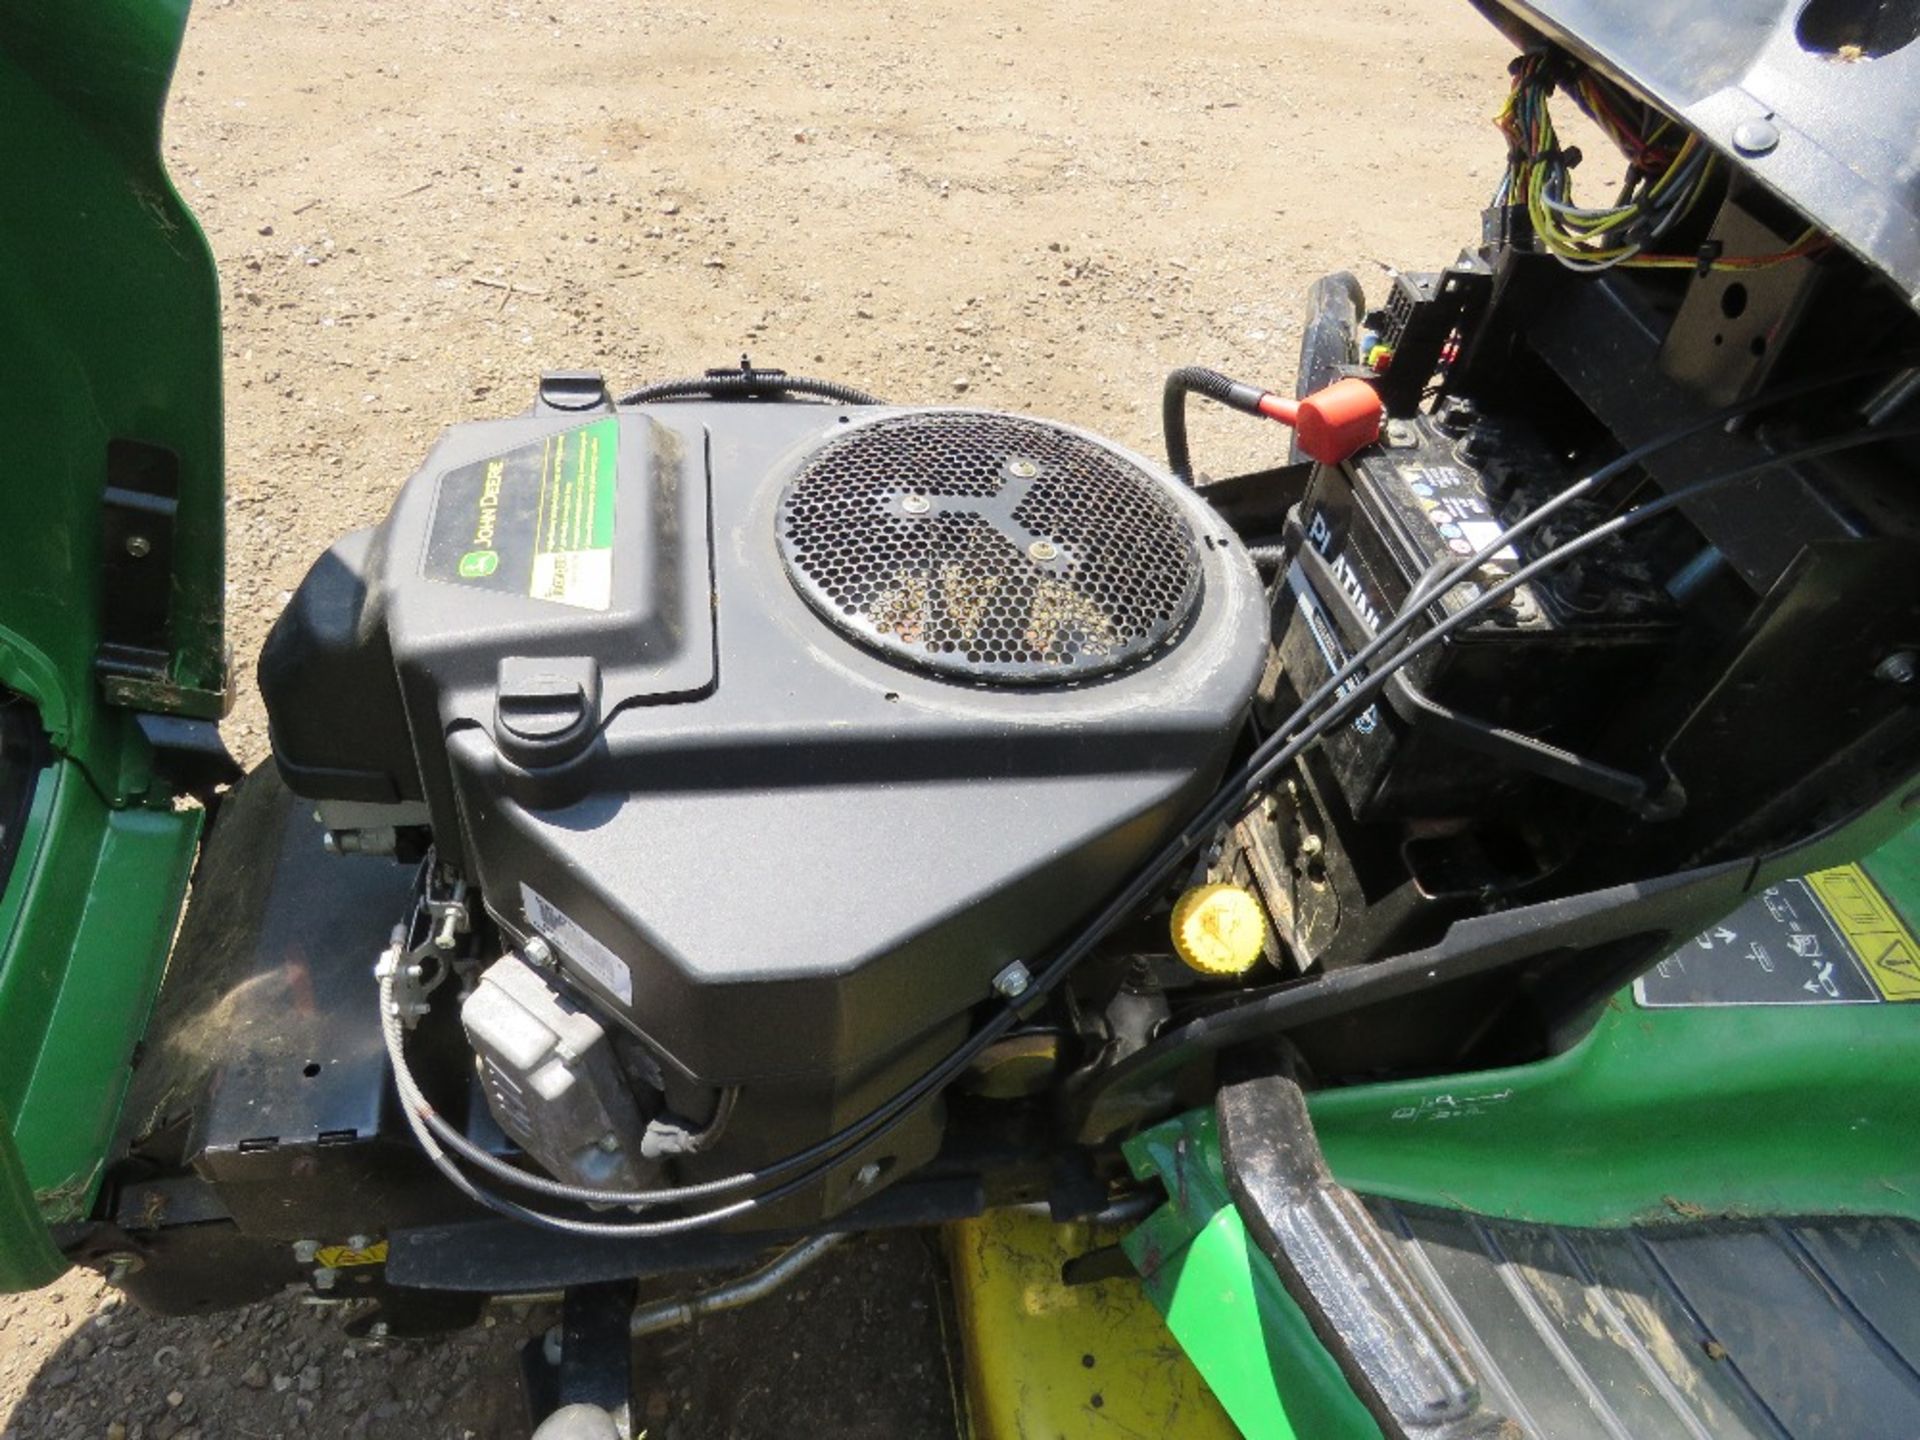 JOHN DEERE X320 PETROL RIDE ON MOWER, 756 REC HOURS. RUNS AND DRIVES BUT MOWERS NOT ENGAGING...NO BE - Image 10 of 11